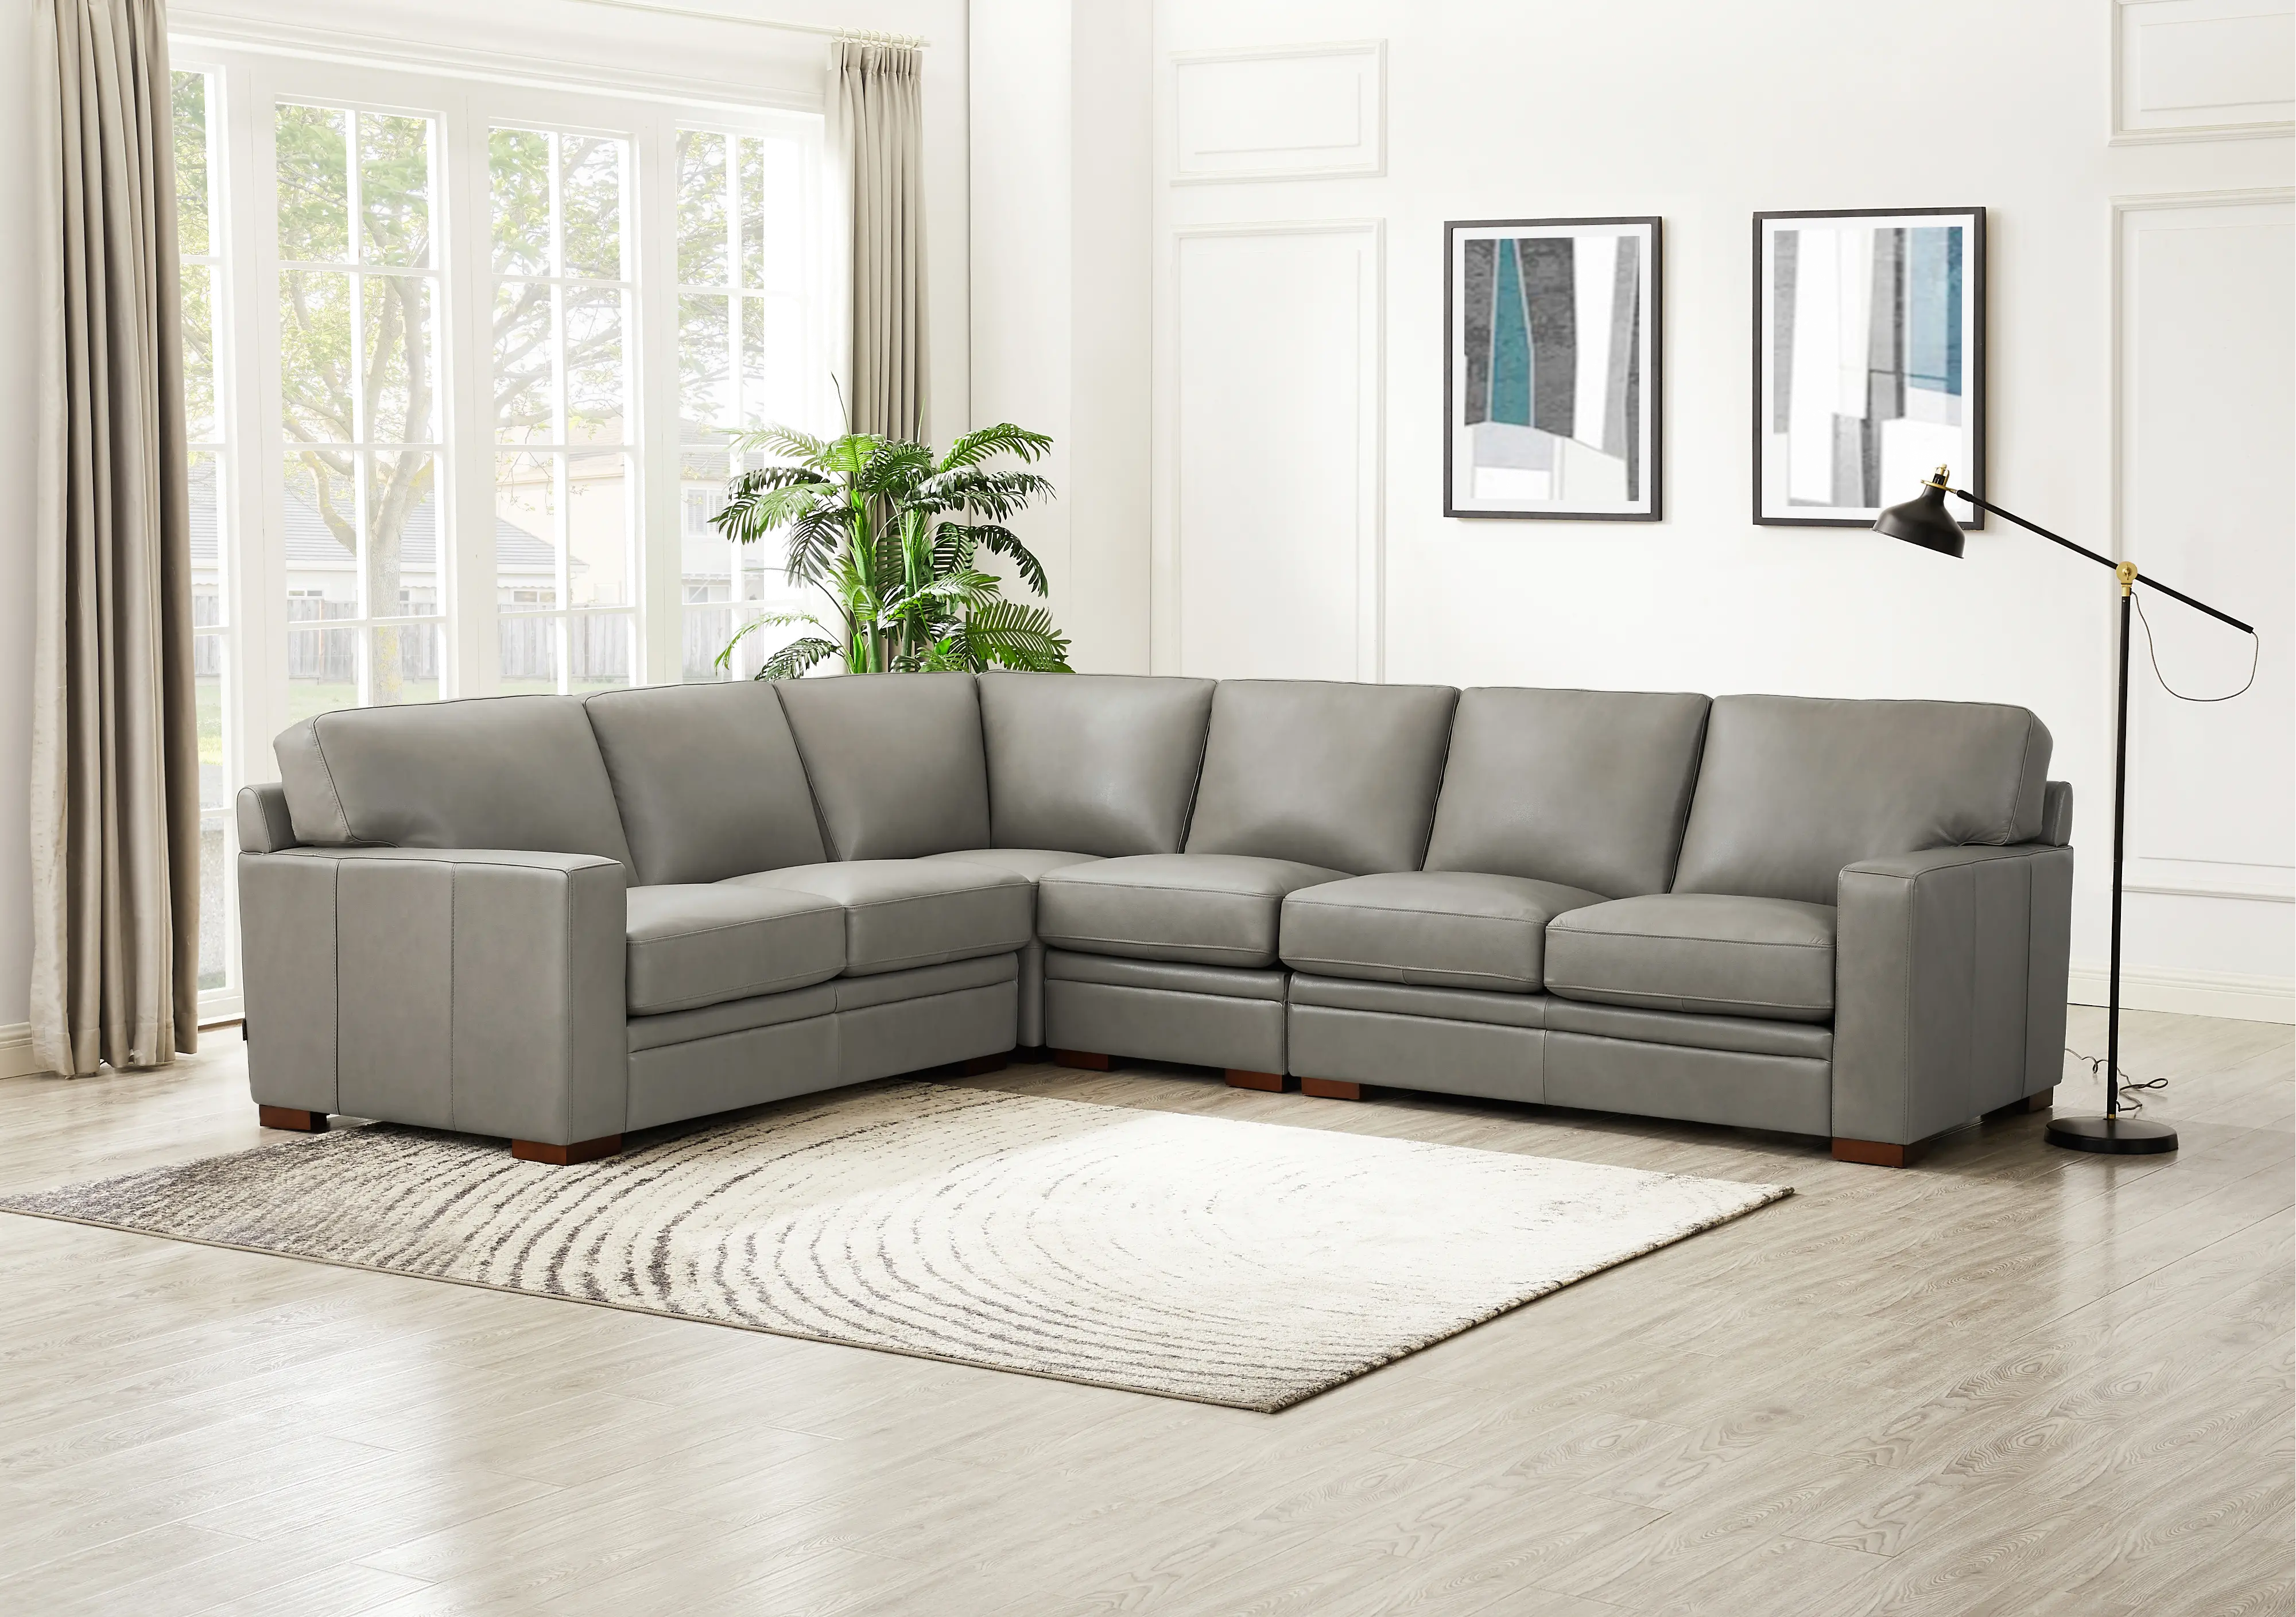 7727-SECT4-2376 Chatsworth Gray Leather 4 Piece Sectional - Amax L sku 7727-SECT4-2376